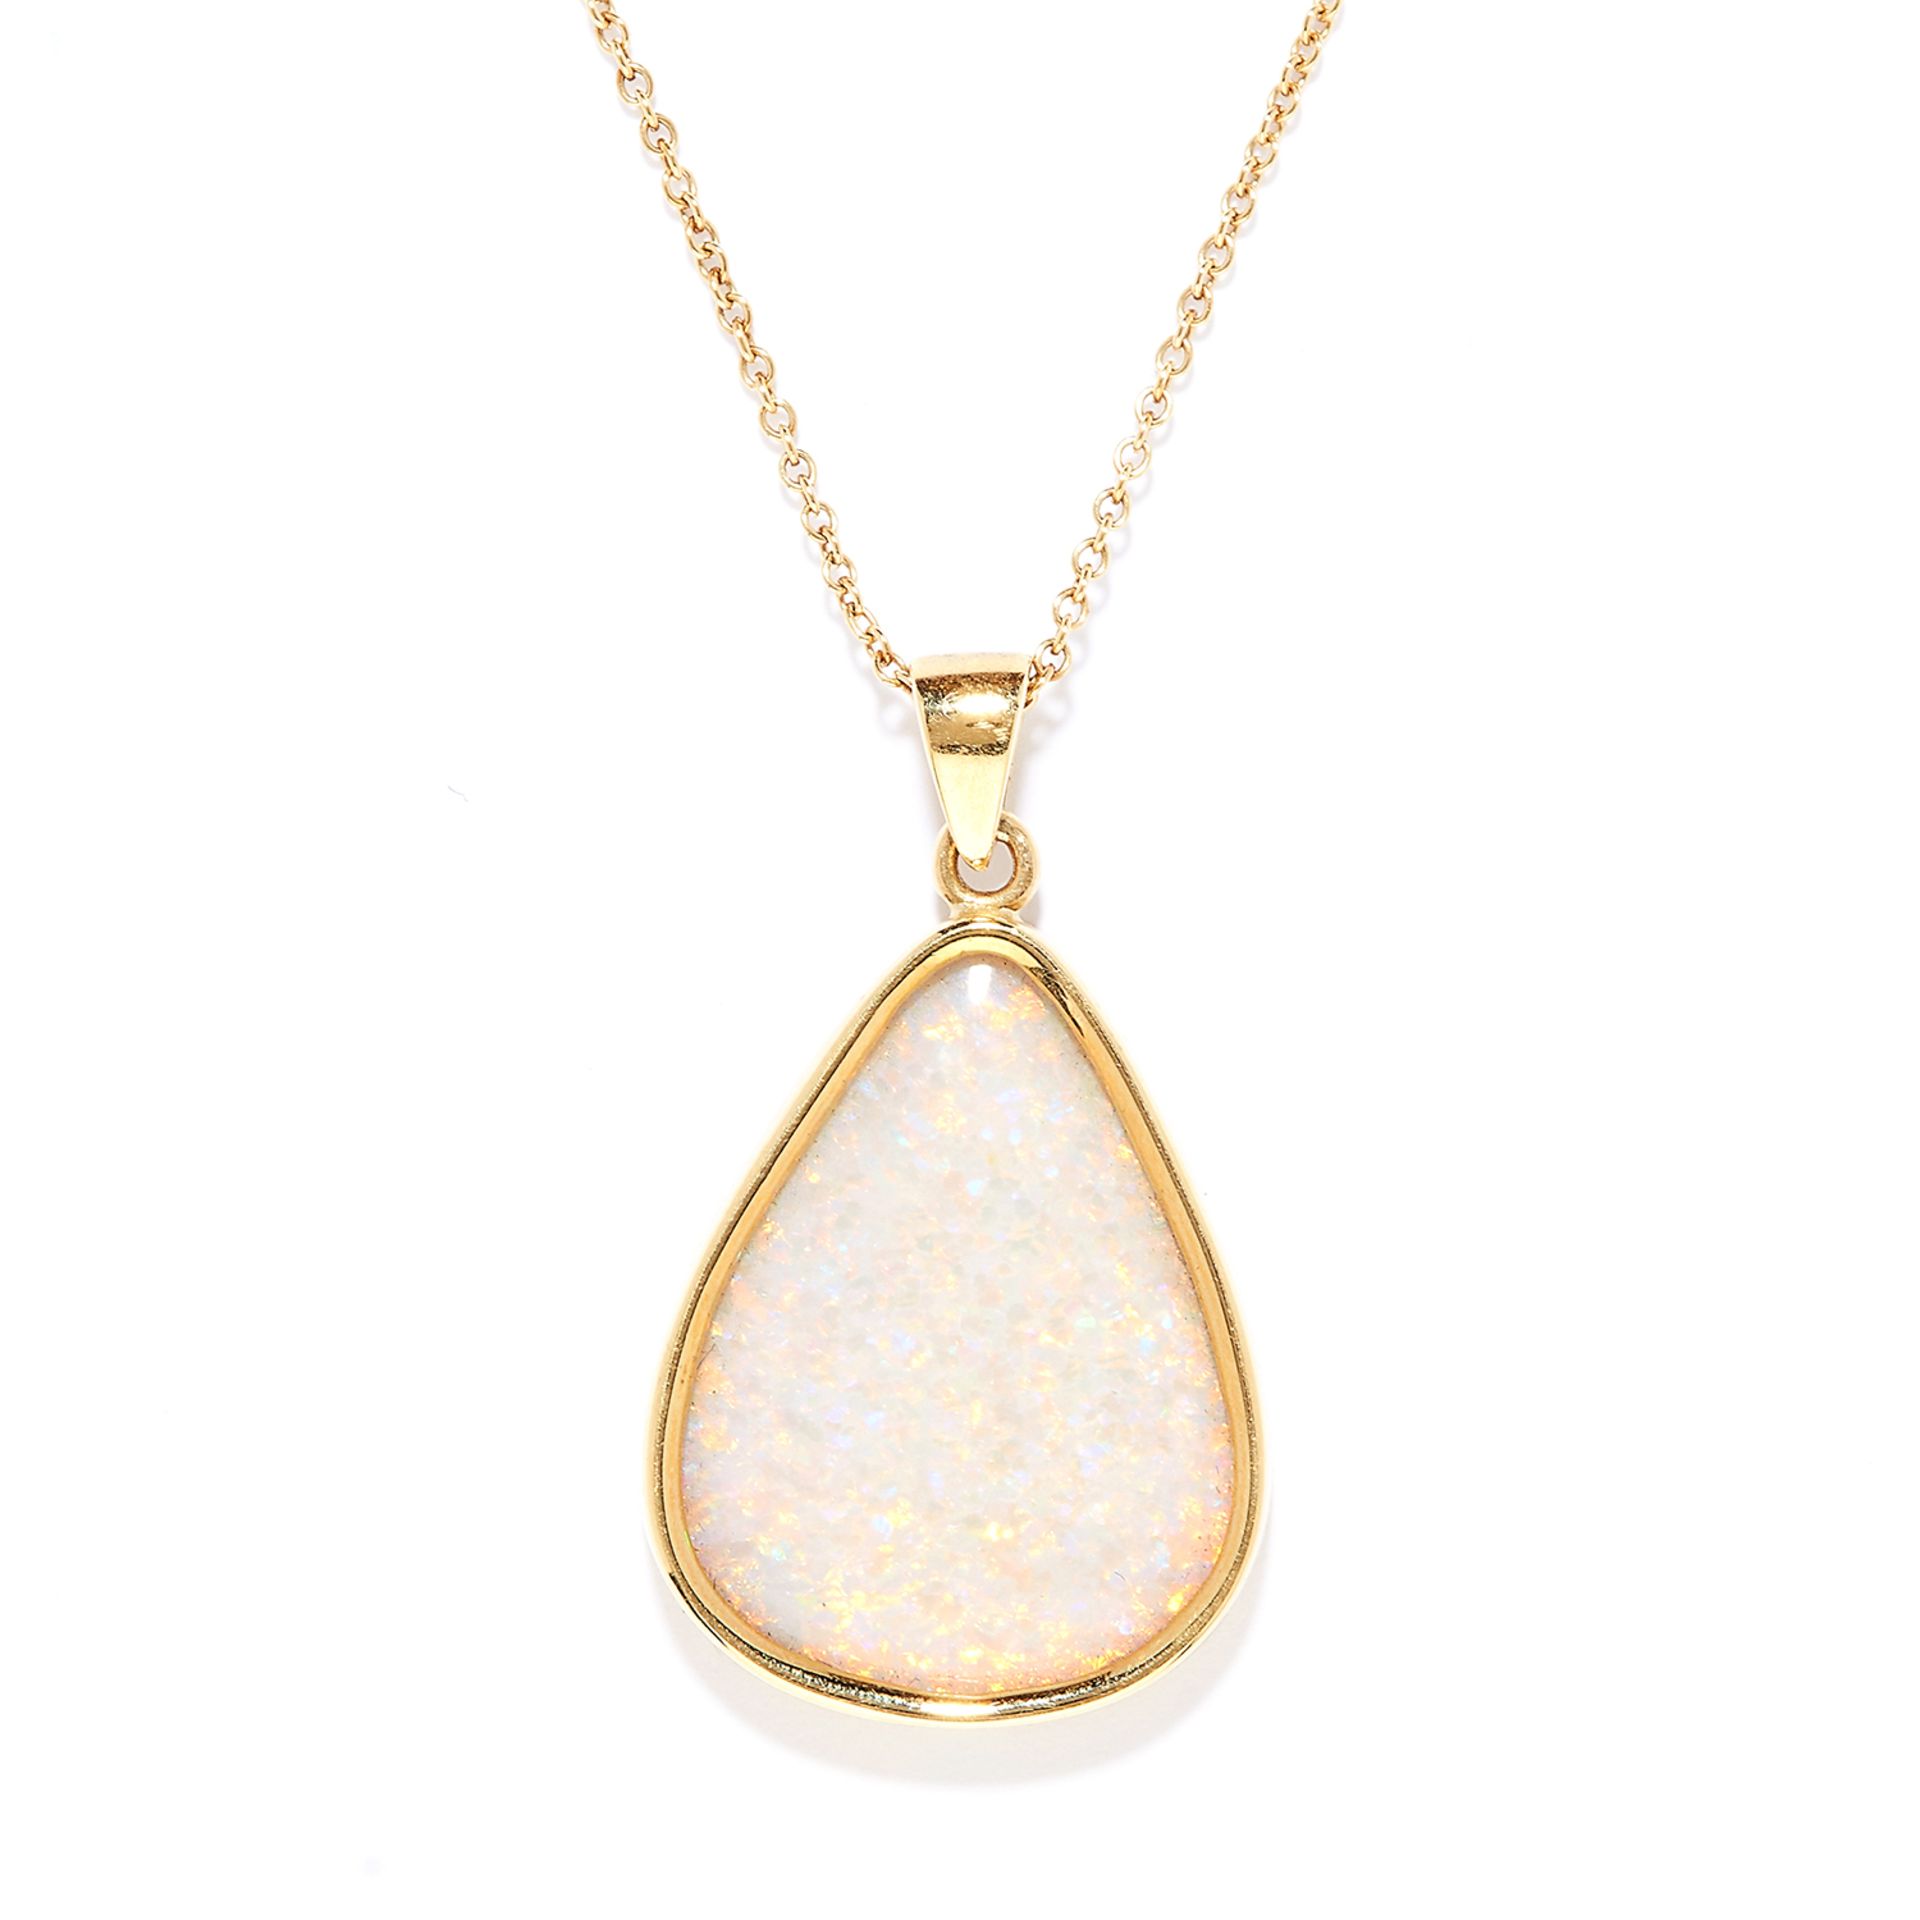 6.31 CARAT OPAL PENDANT in 18ct yellow gold, the tapering polished opal of 6.40 carats in a plain